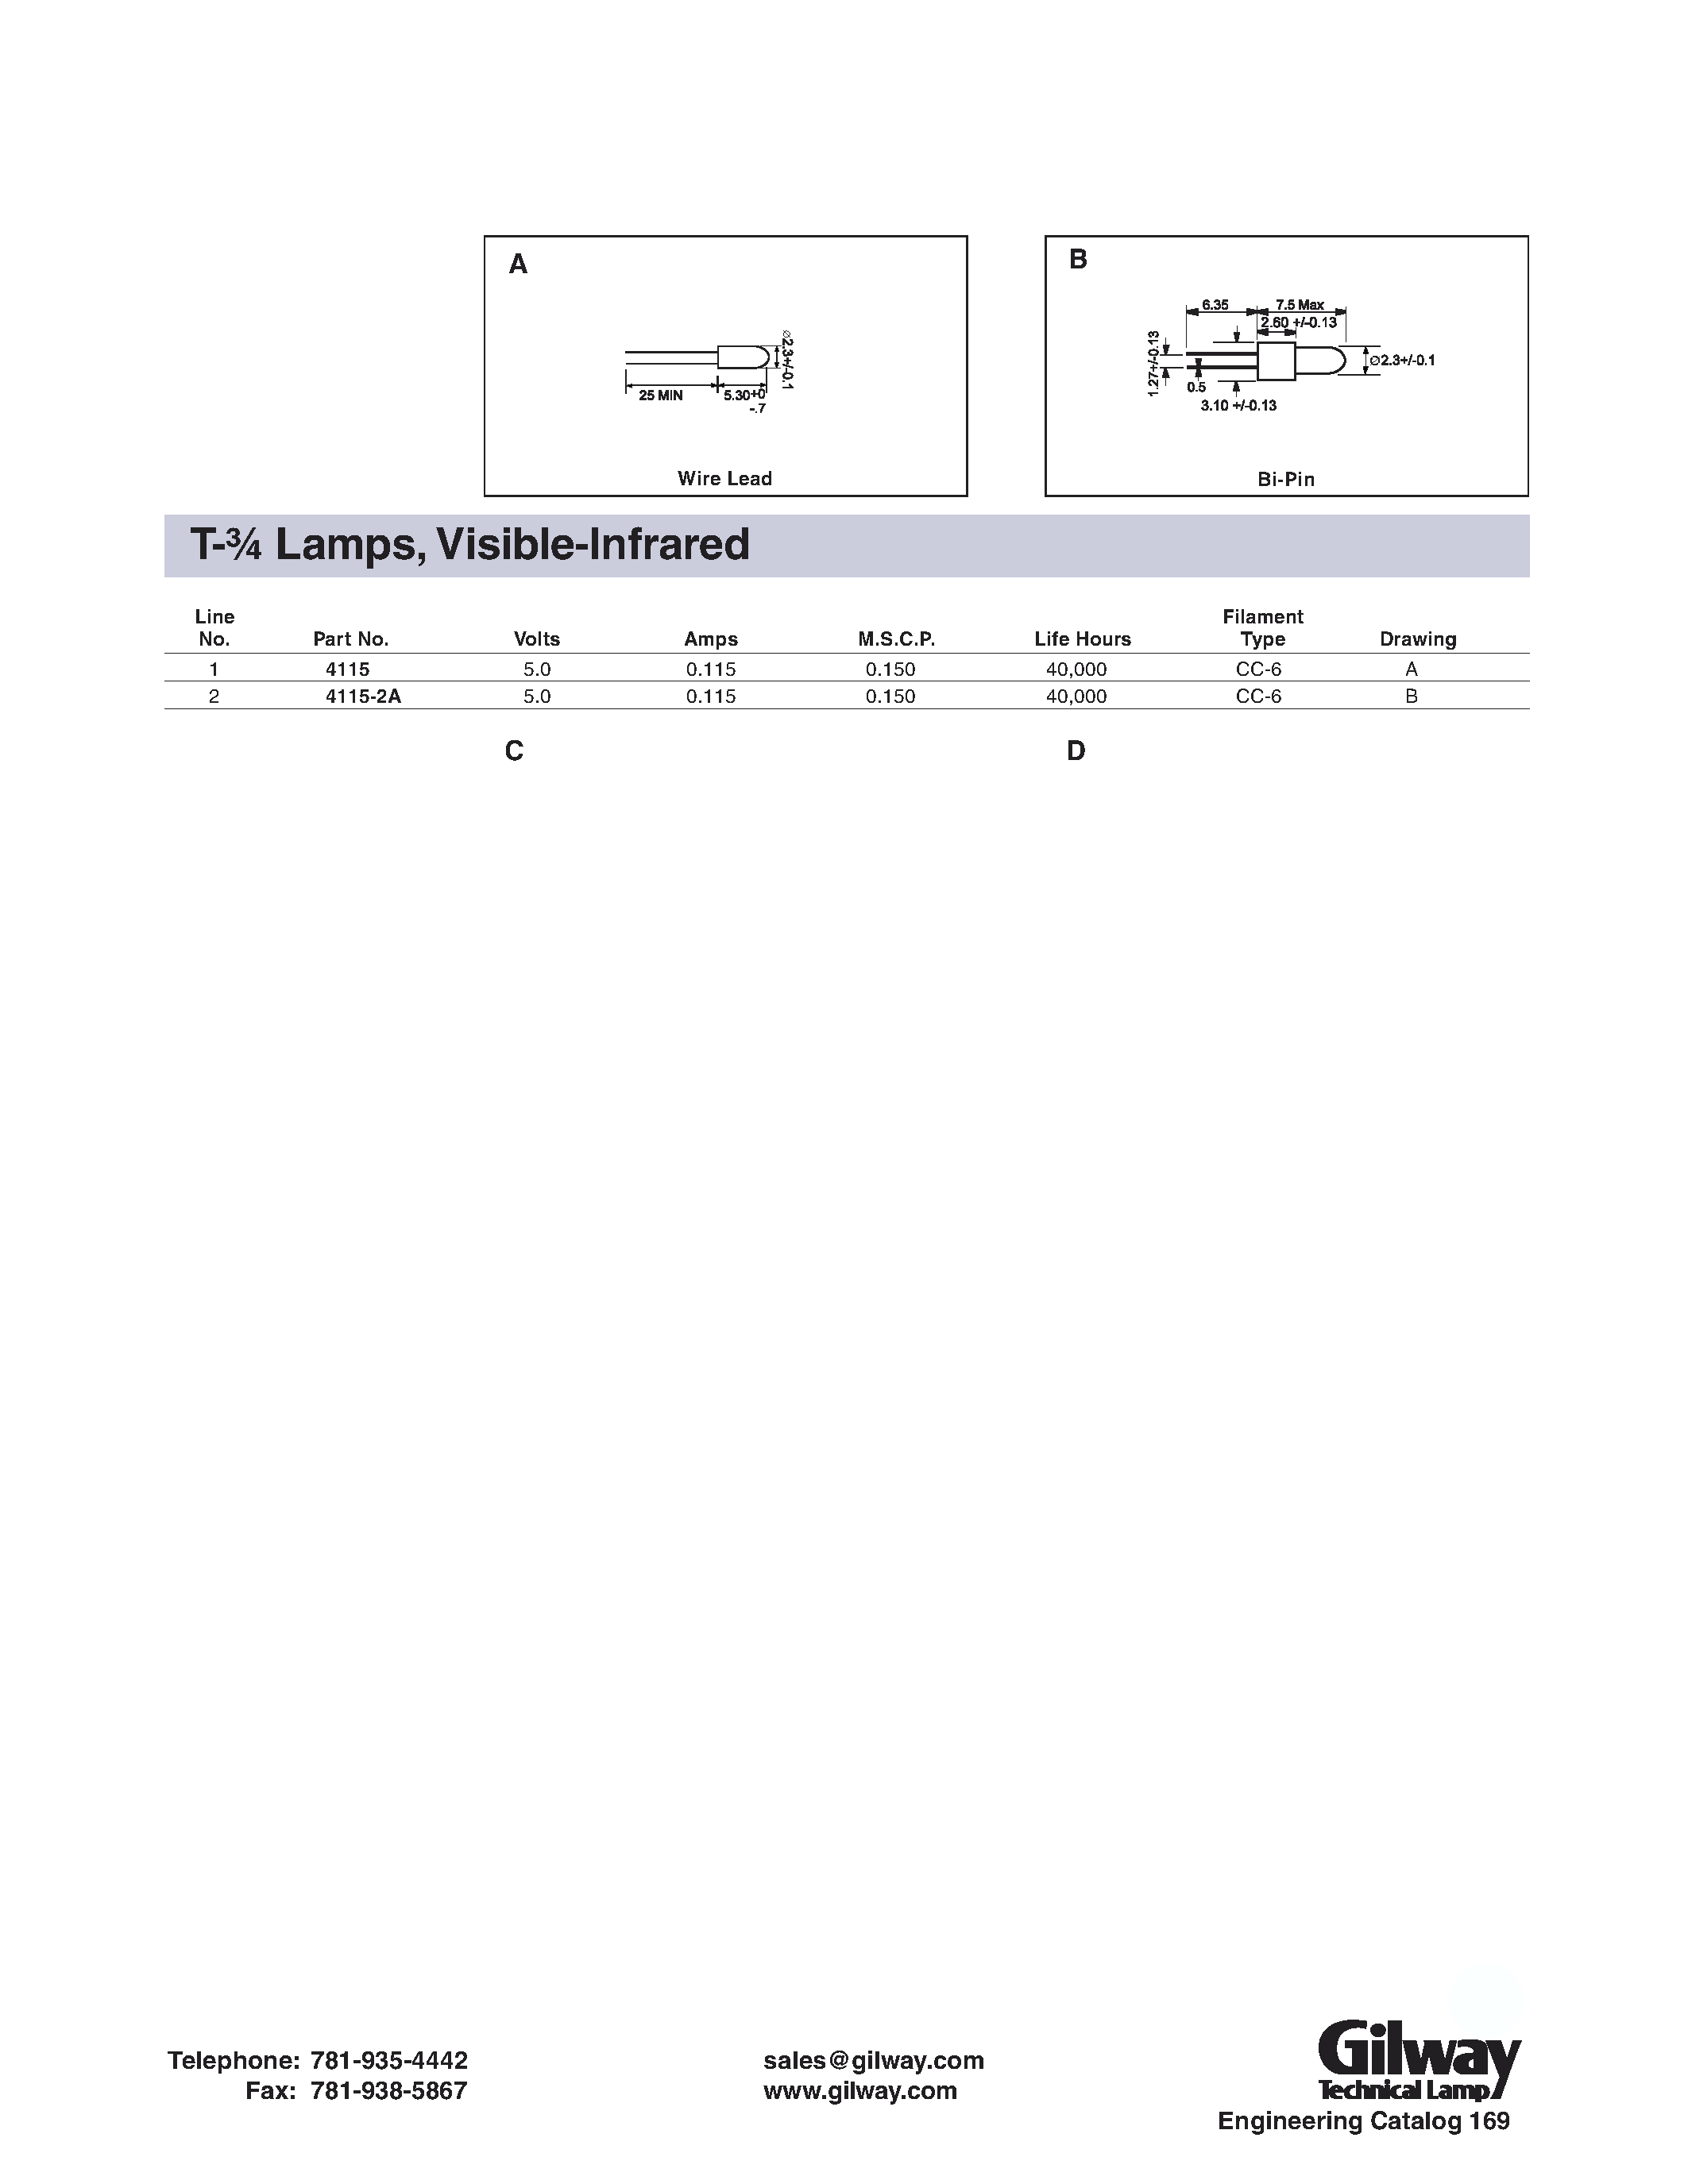 Datasheet 4115-2A - T- Lamps/ Visible-Infrared page 1